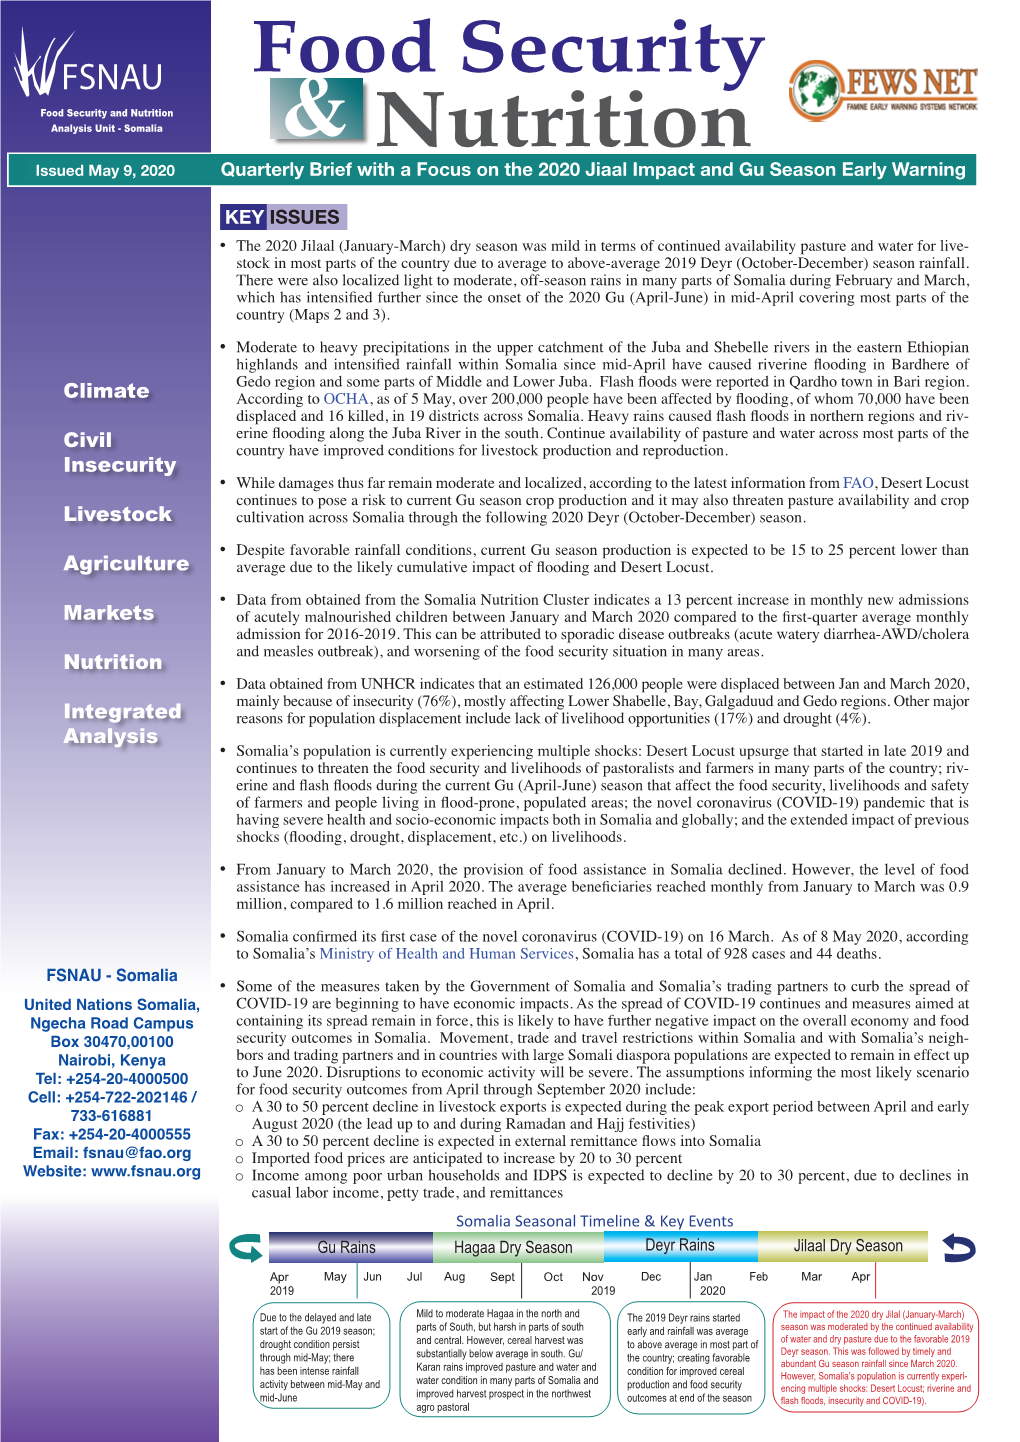 Food Security and Nutrition Quarterly Brief May 2020